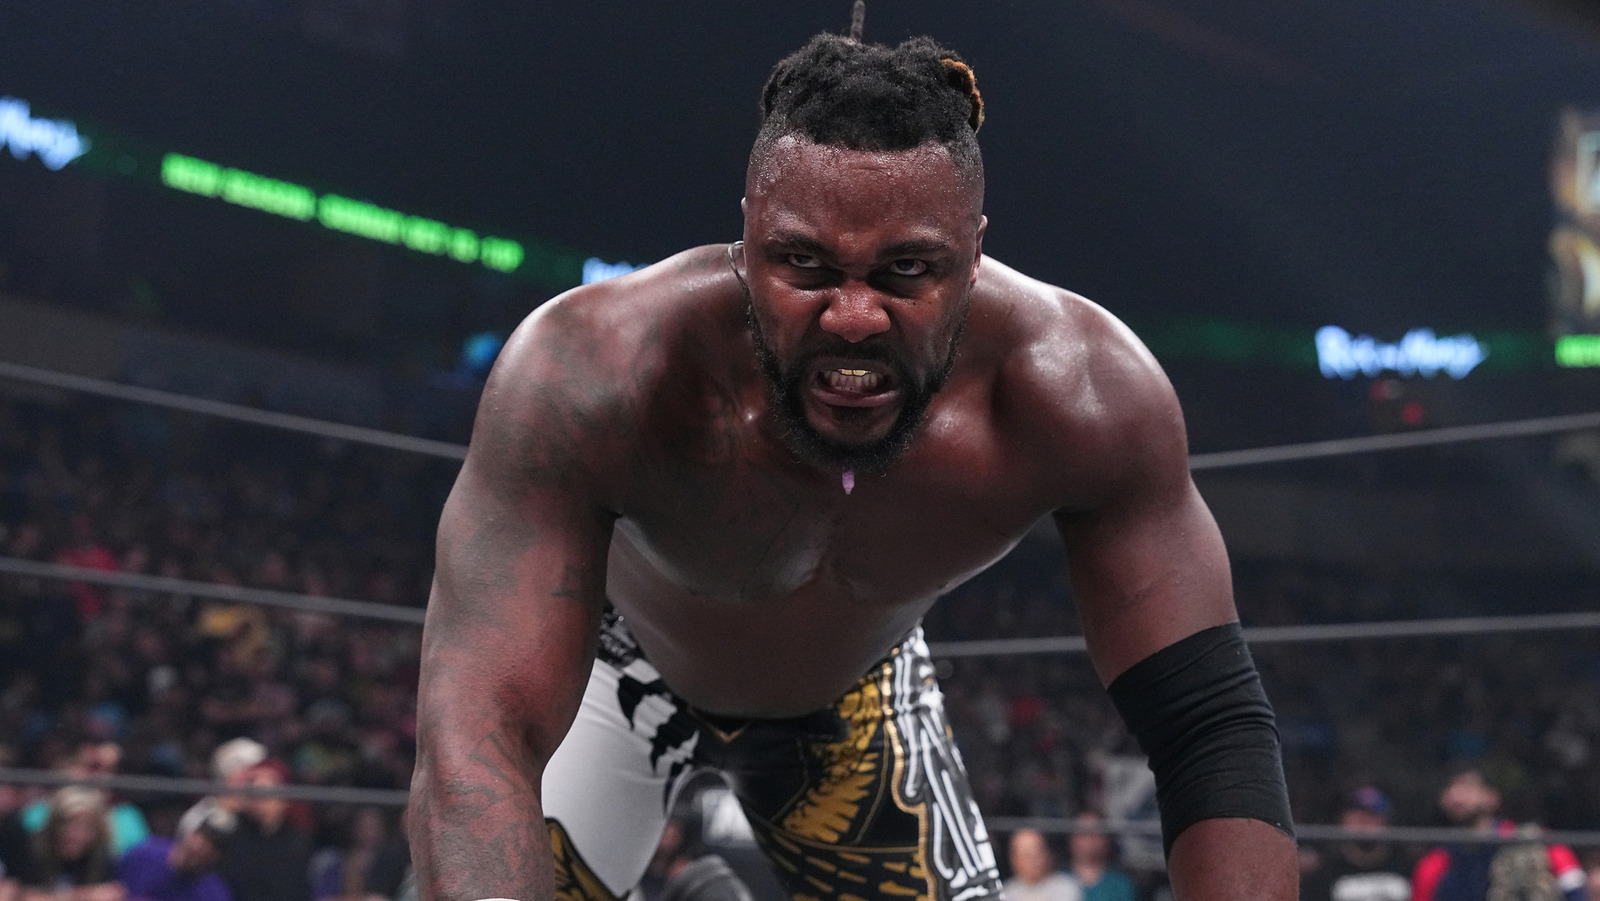 Swerve Strickland To Face Former Friend At AEW World's End